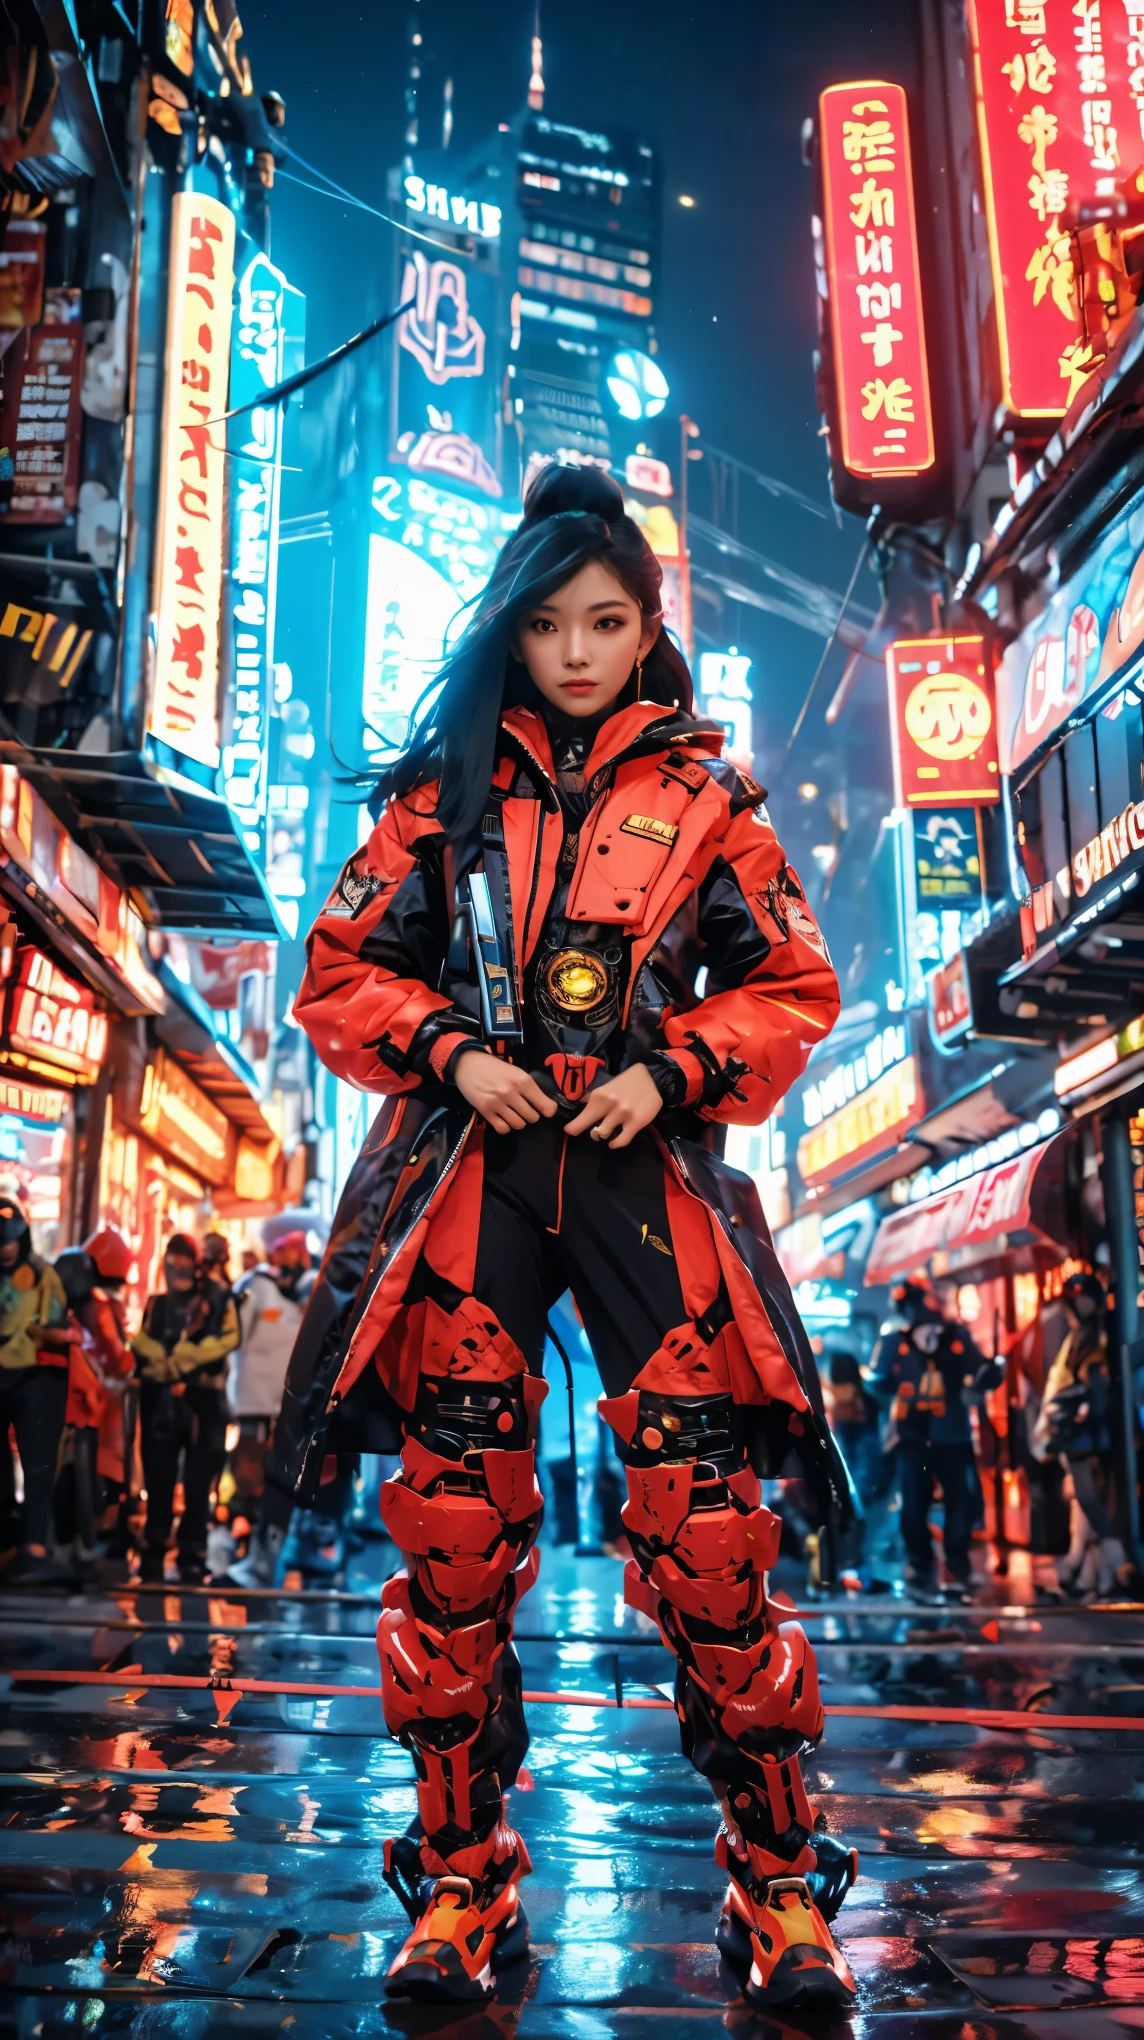 In the pulsating core of the cyberpunk metropolis, Jakarta, a strikingly ethereal Asian woman with a voluminous waterfall of ebony hair grabs attention in the vibrant, neon-lit crowd. Clad in a formidable, fiery-red mecha suit, she emanates tenacity and grit. The polished suit's surfaces mirror the technicolor cityscape, enhancing the enthralling lights and holograms that dart through the air. With her ornate, ceremonial blade gripped tightly in hand, this captivating mystery embodies perseverance and optimism amidst Jakarta's riotous, fut